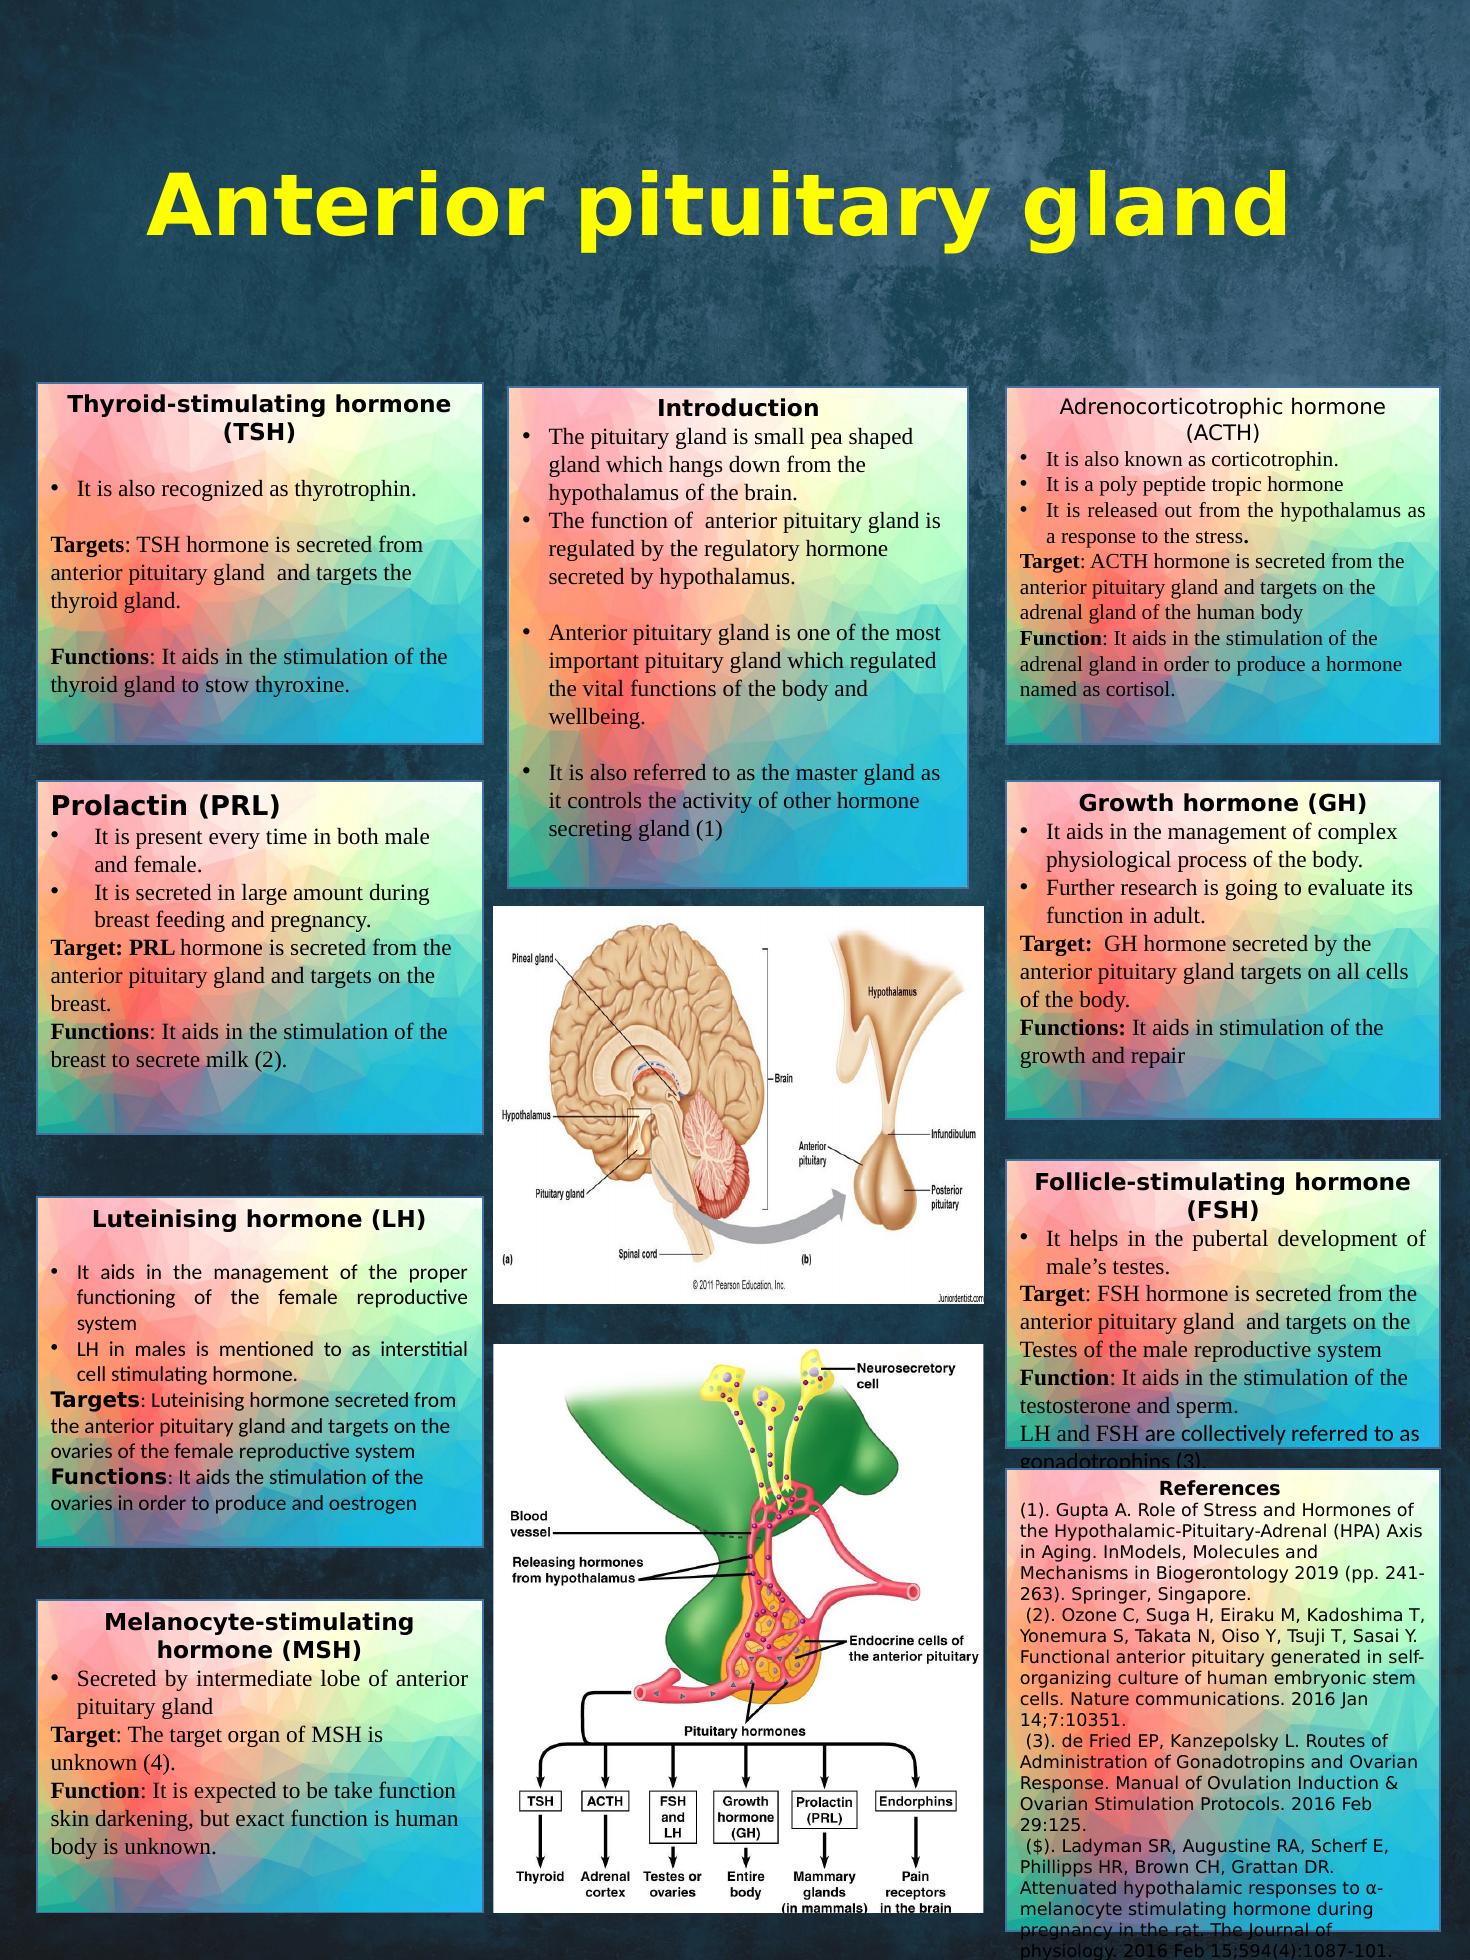 Anterior Pituitary Gland: Functions and Hormones_1